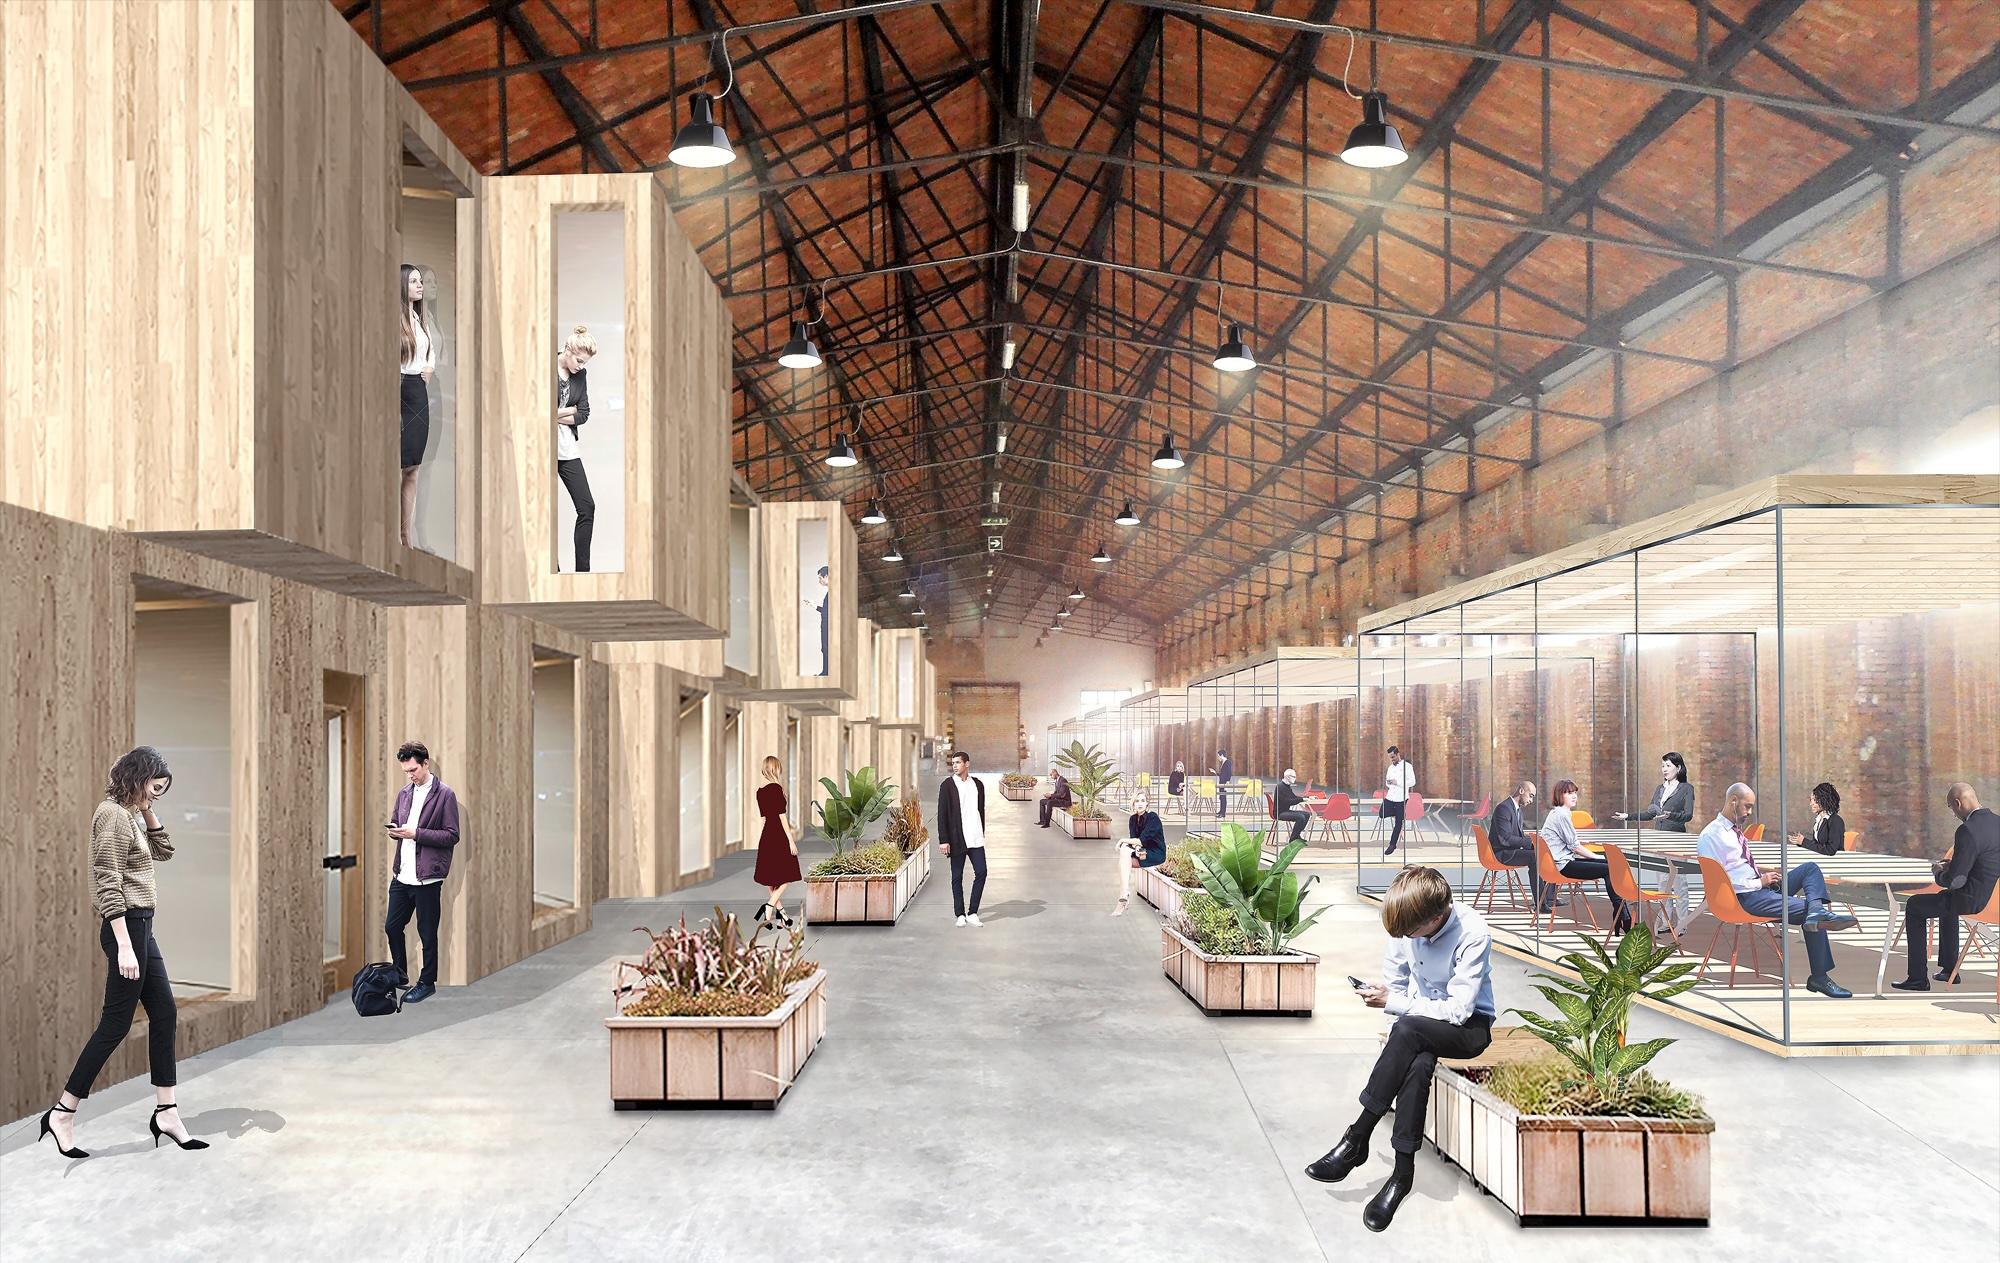 The imagination of a co-working space inside one of the warehouses as a prefigurative value of what can be realized in the future